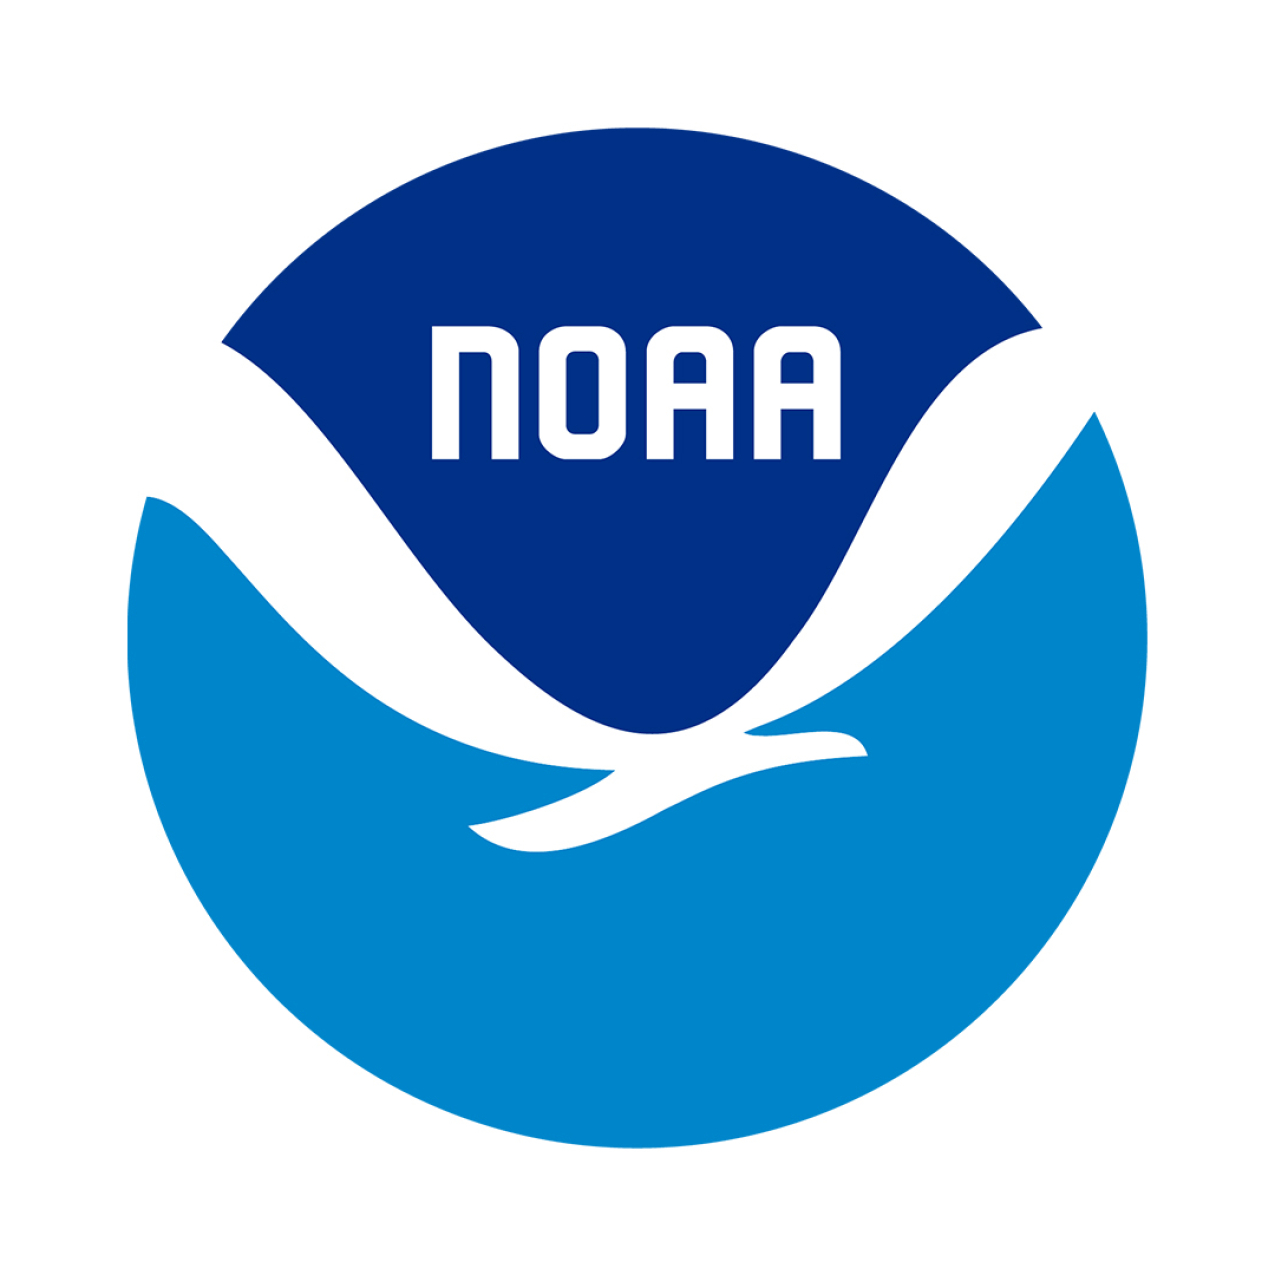 NOAA Logo, featuring a white bird separating two fields of blue, darker on top, lighter on bottom. The word NOAA, sits in the darker blue field above the bird.